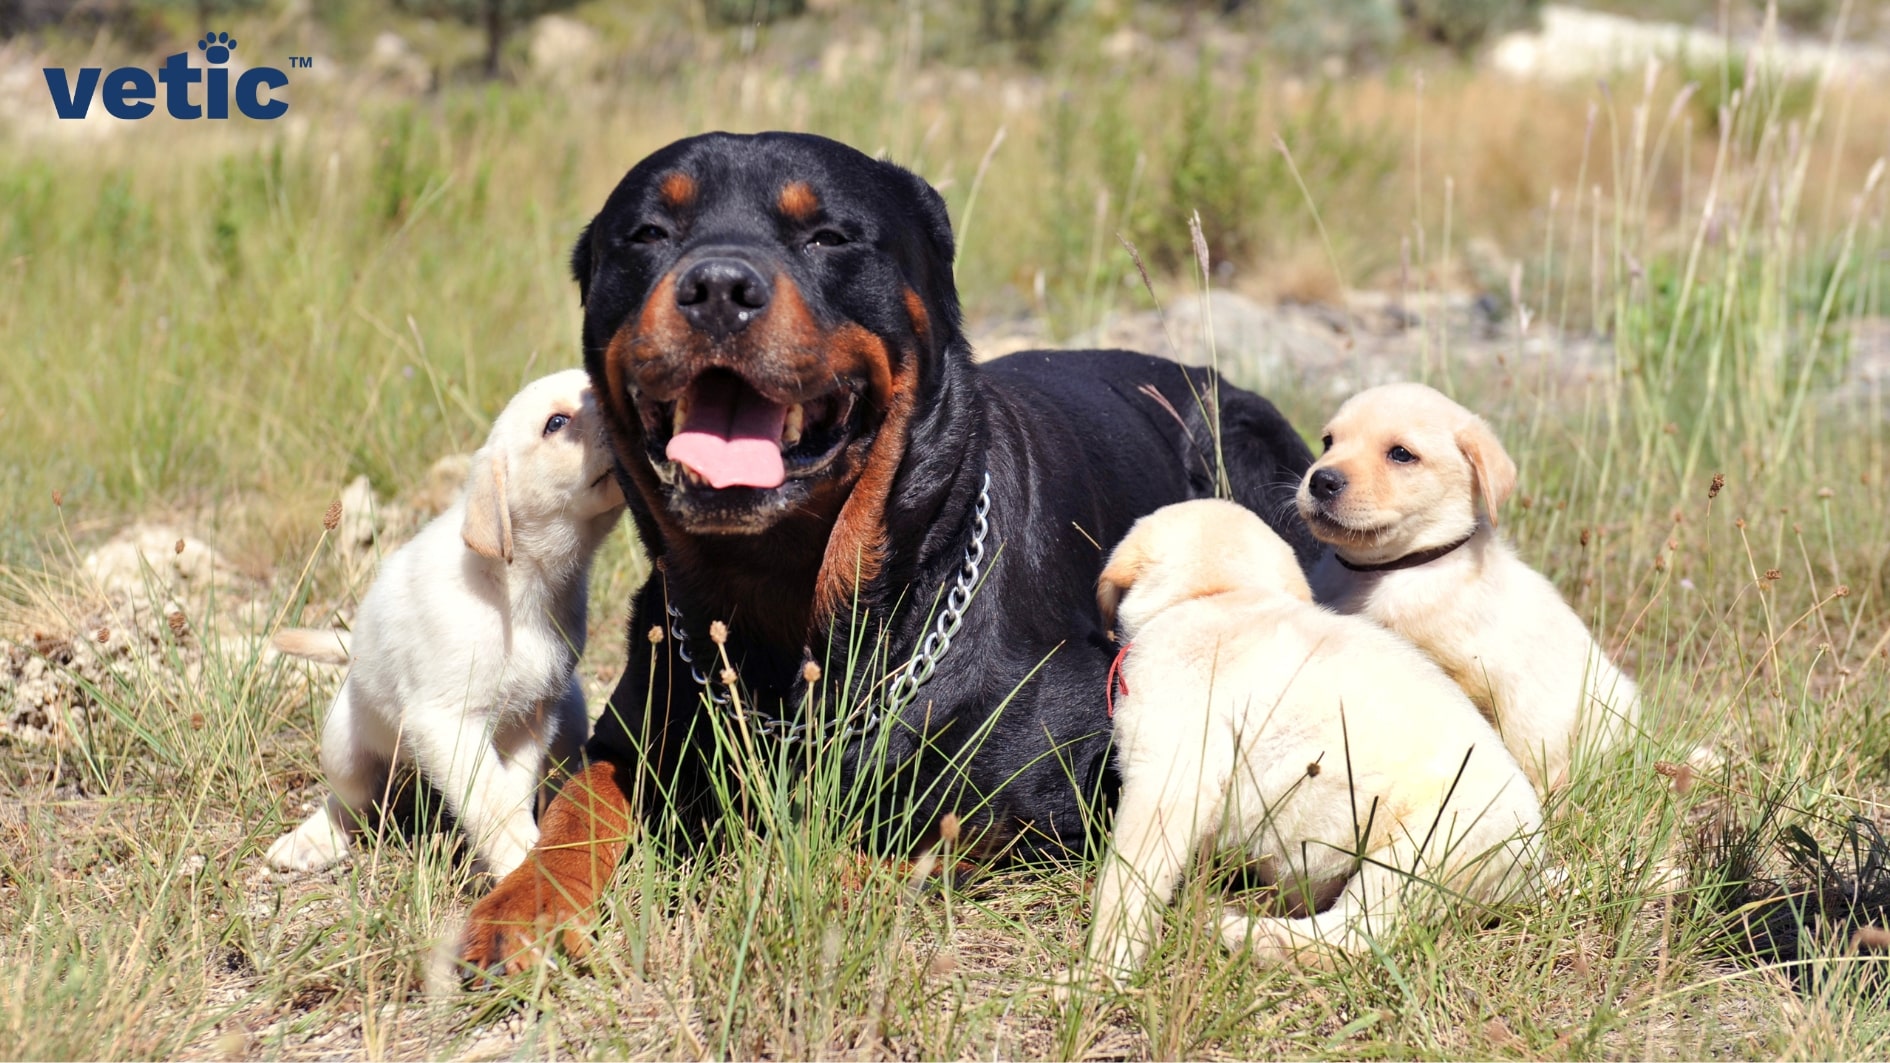 An adult rottweiler with a metal chain around his neck sitting in a rocky field surrounded by 3 fawn coloured labrador retriever pups. The Rottweiler breed is vigilant but that doesn't make them any less sociable and friendly. they simply need the right training.